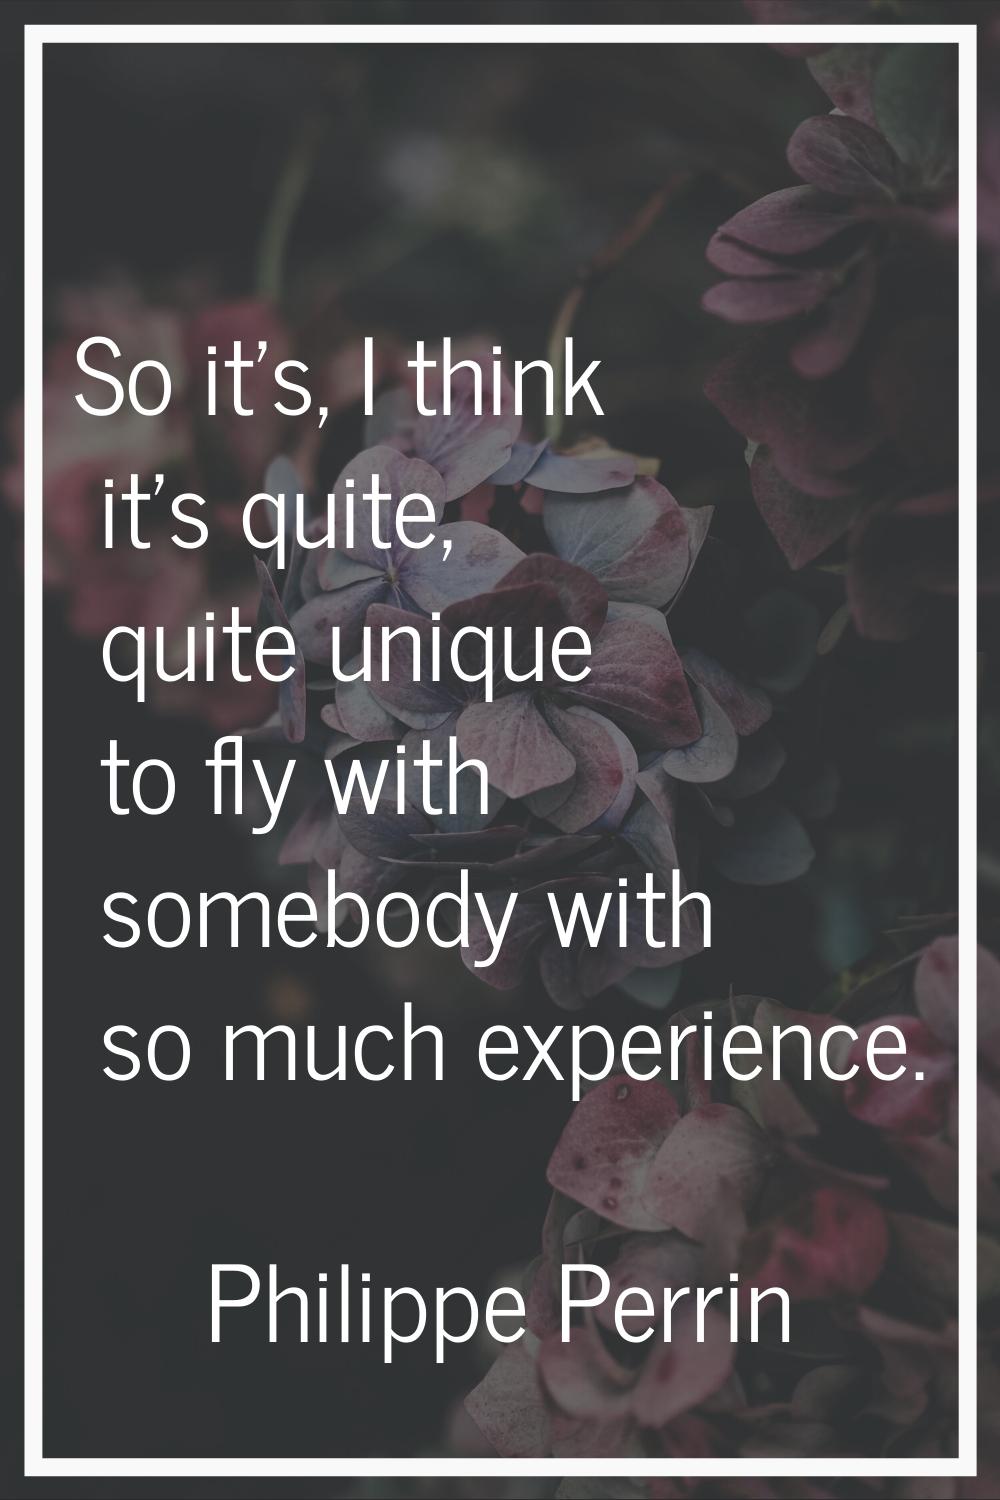 So it's, I think it's quite, quite unique to fly with somebody with so much experience.